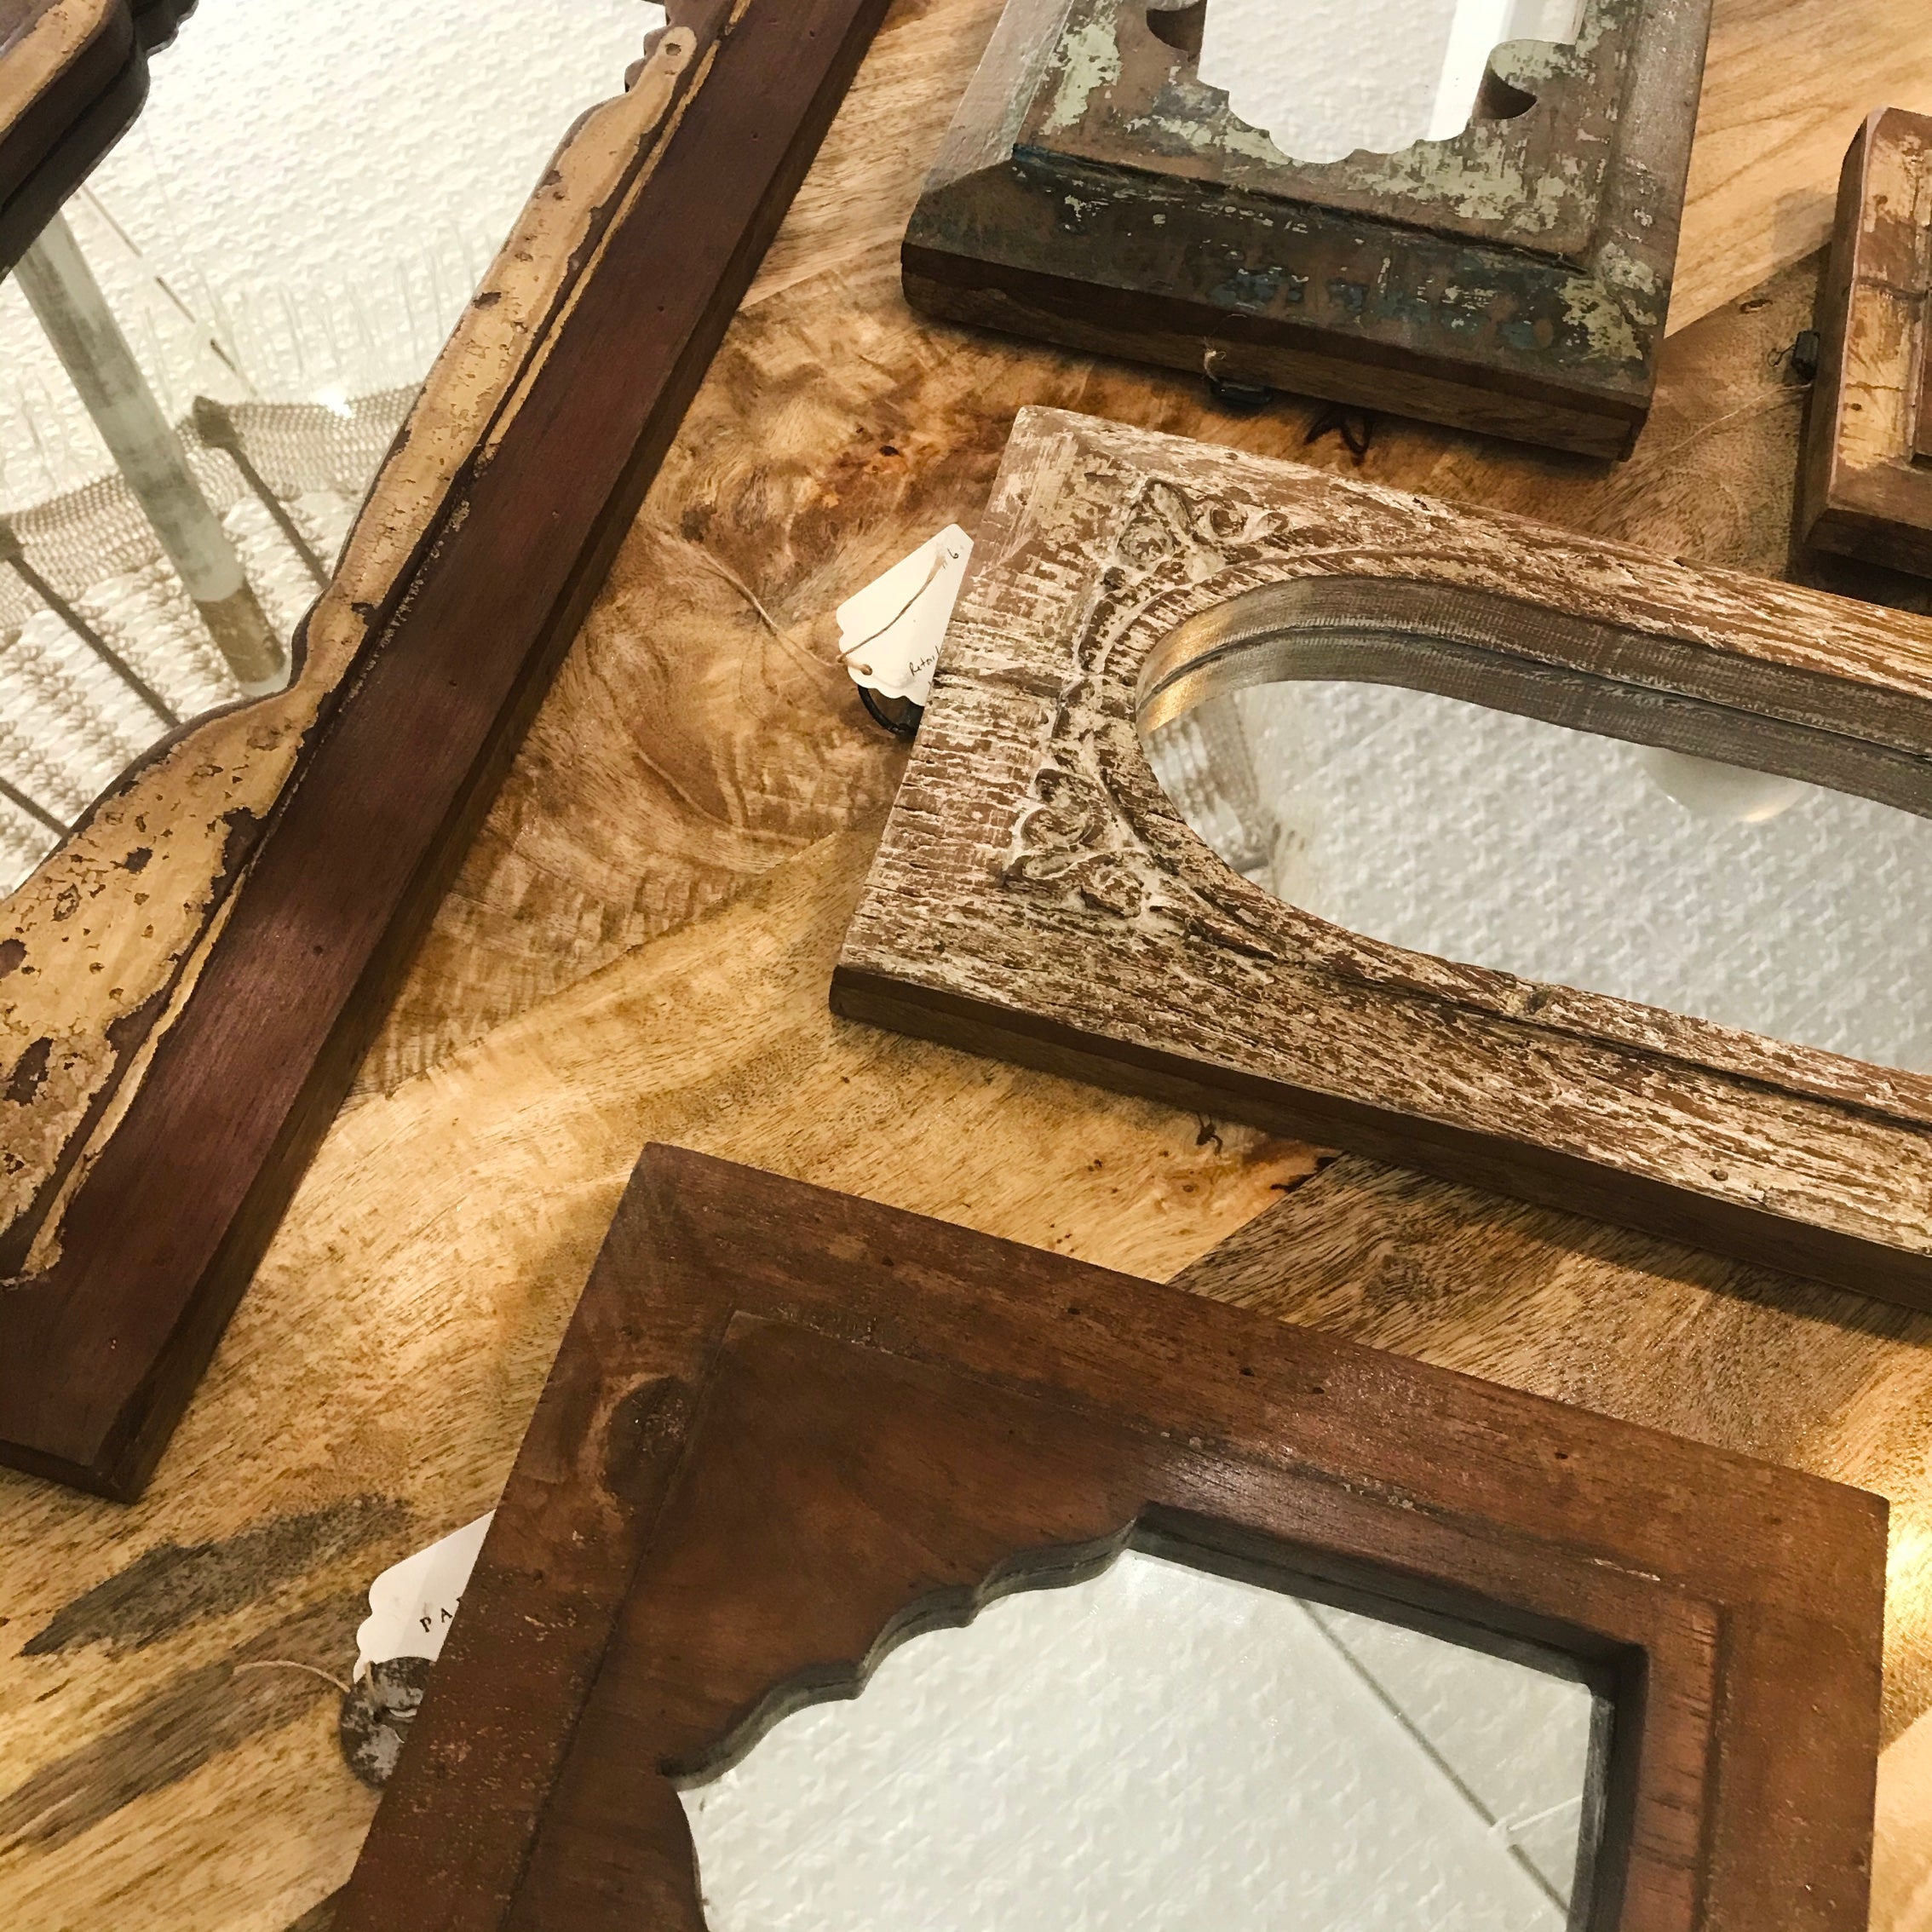 Indian Timber Arch Mirrors - Assorted Designs